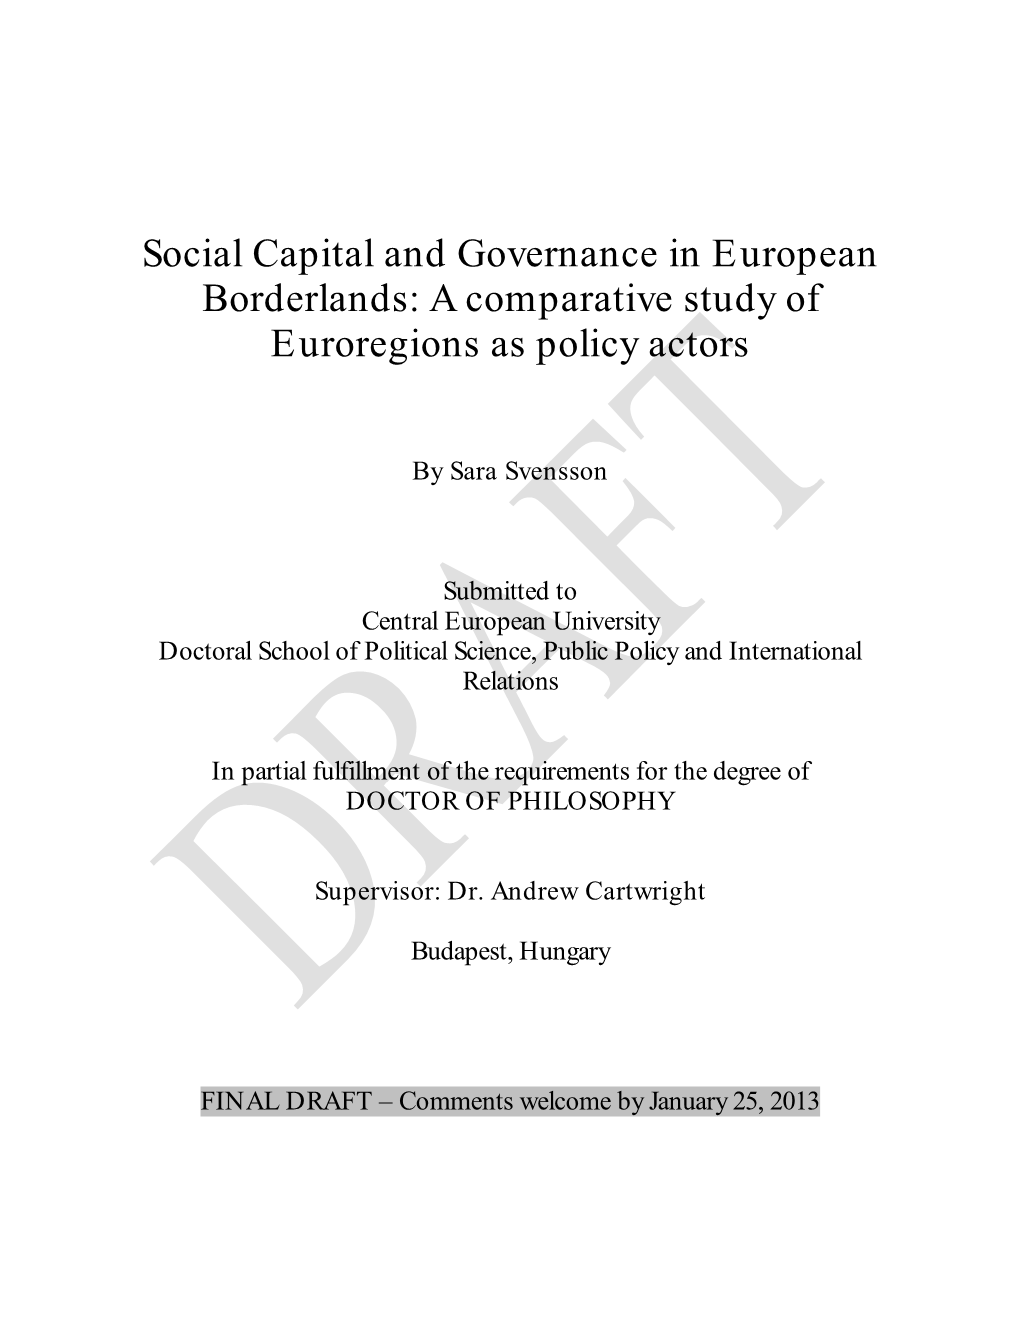 Social Capital and Governance in European Borderlands: a Comparative Study of Euroregions As Policy Actors